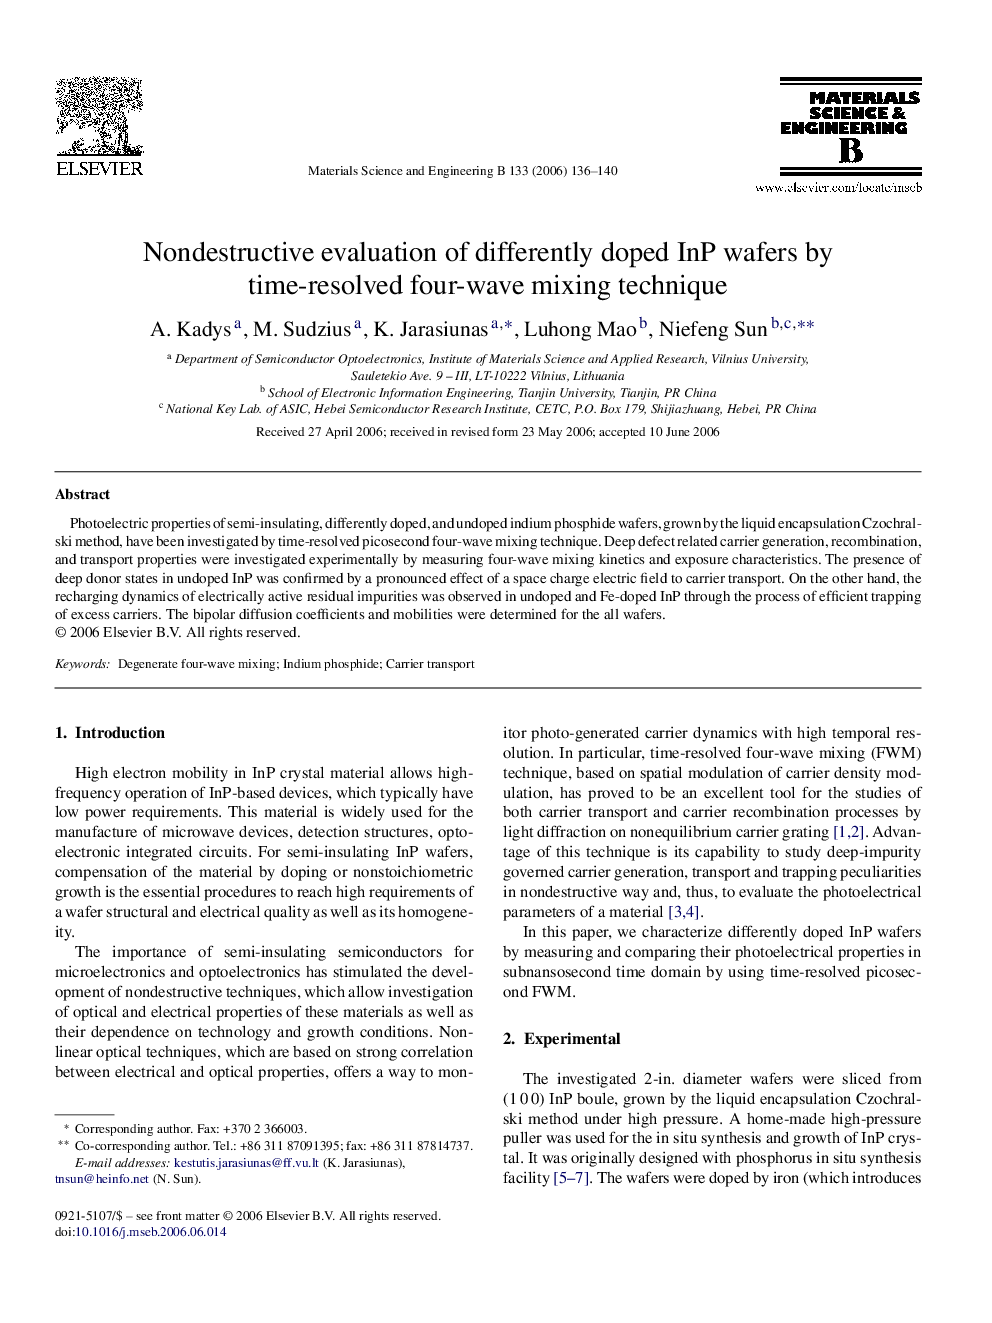 Nondestructive evaluation of differently doped InP wafers by time-resolved four-wave mixing technique